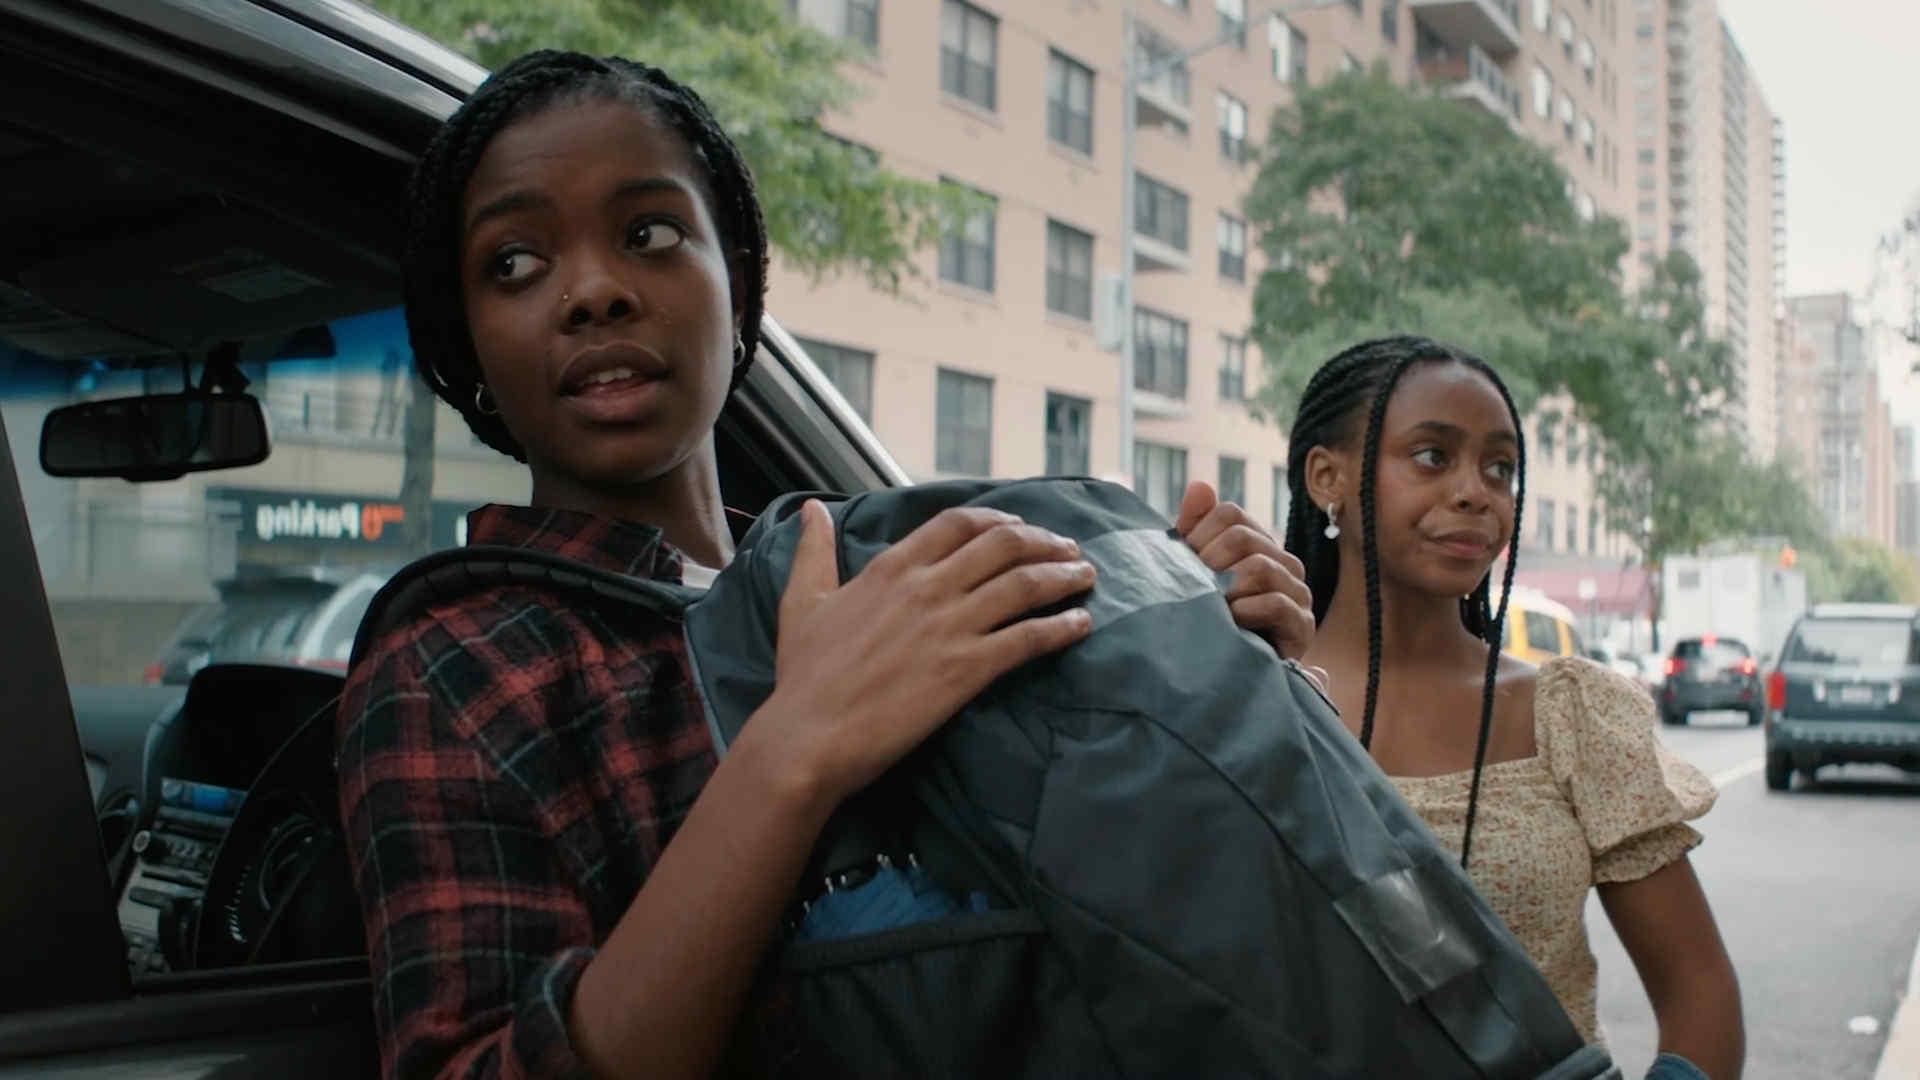 In this still from the film, two girls are exiting a car onto a busy Manhattan street. One girl is holding a backpack and they have facial expressions of concern